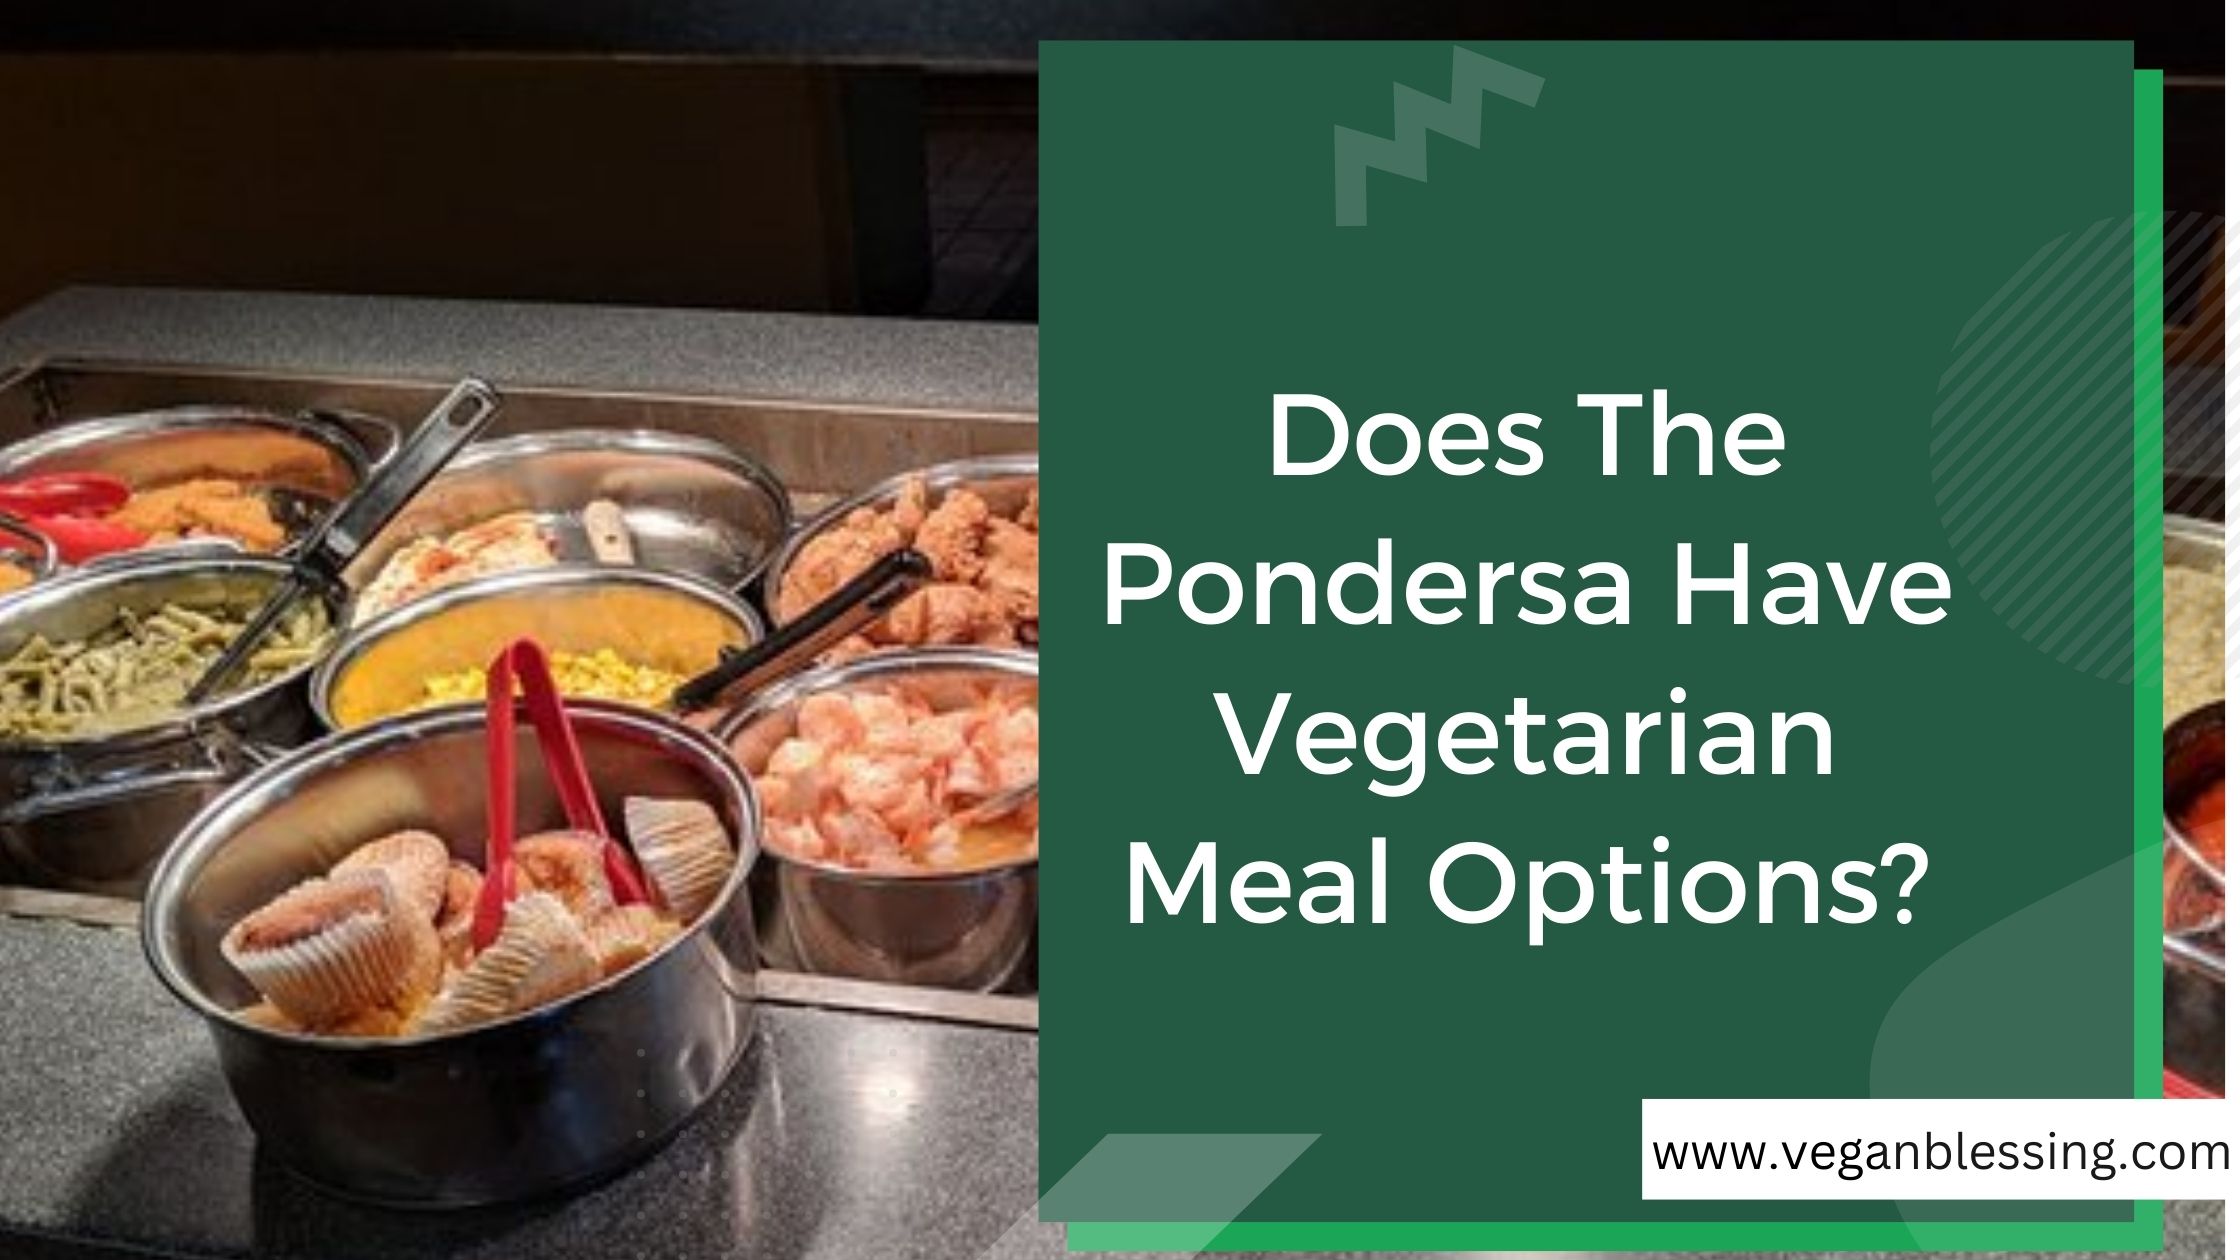 Does The Pondersa Have Vegetarian Meal Options? Does The Pondersa Have Vegetarian Meal Options